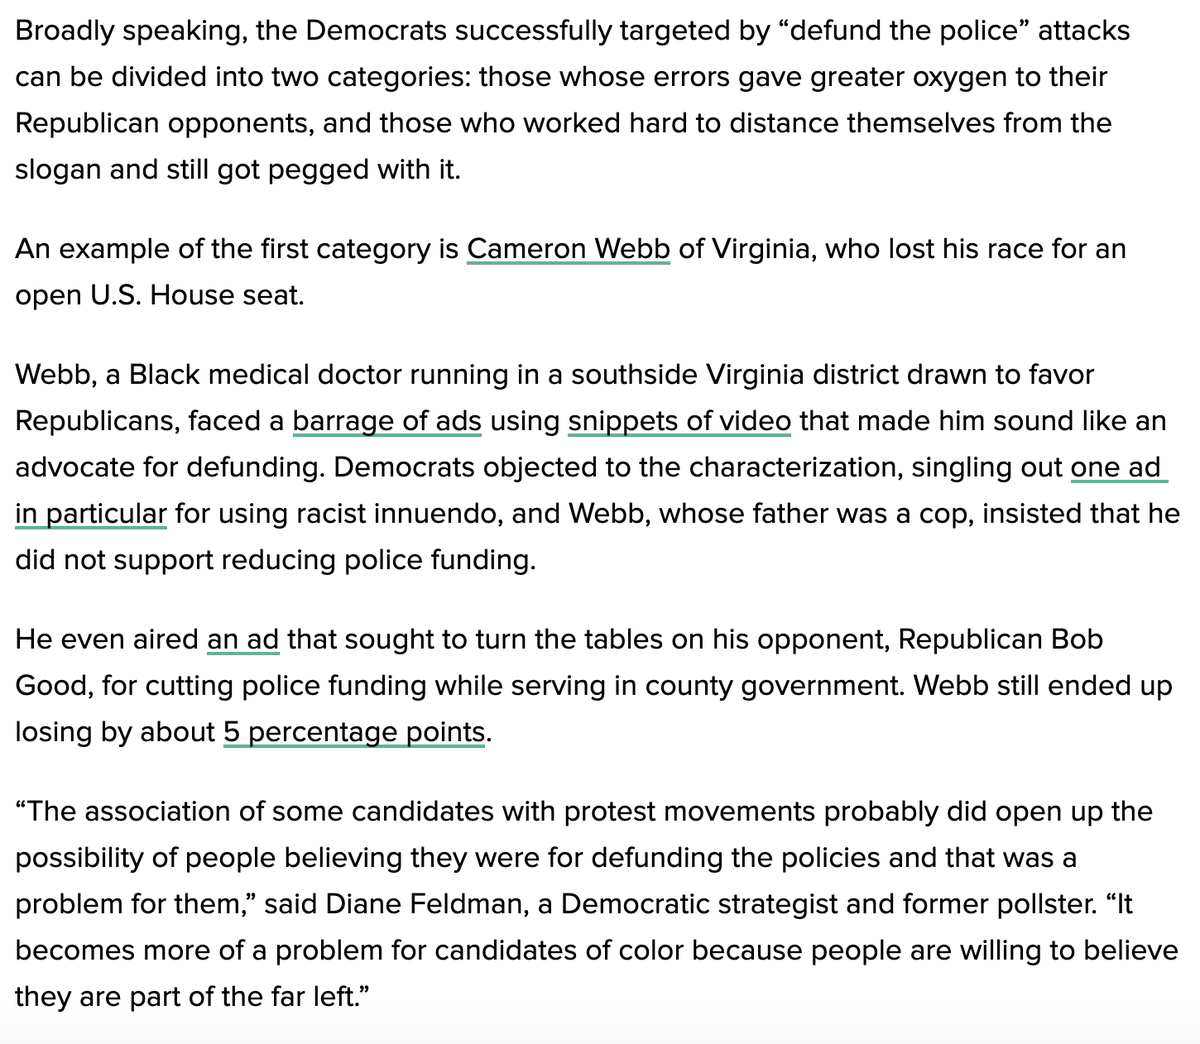 That's true, but there were definitely cases where the charges/smears stuck more because of mistakes that candidates made suggesting they endorsed the "defund" language. I underscored that issue in Cameron Webb's race in Virginia:  https://www.huffpost.com/entry/republicans-defund-the-police-attacks-democrats-election-2020_n_5fb68698c5b695be83008c57